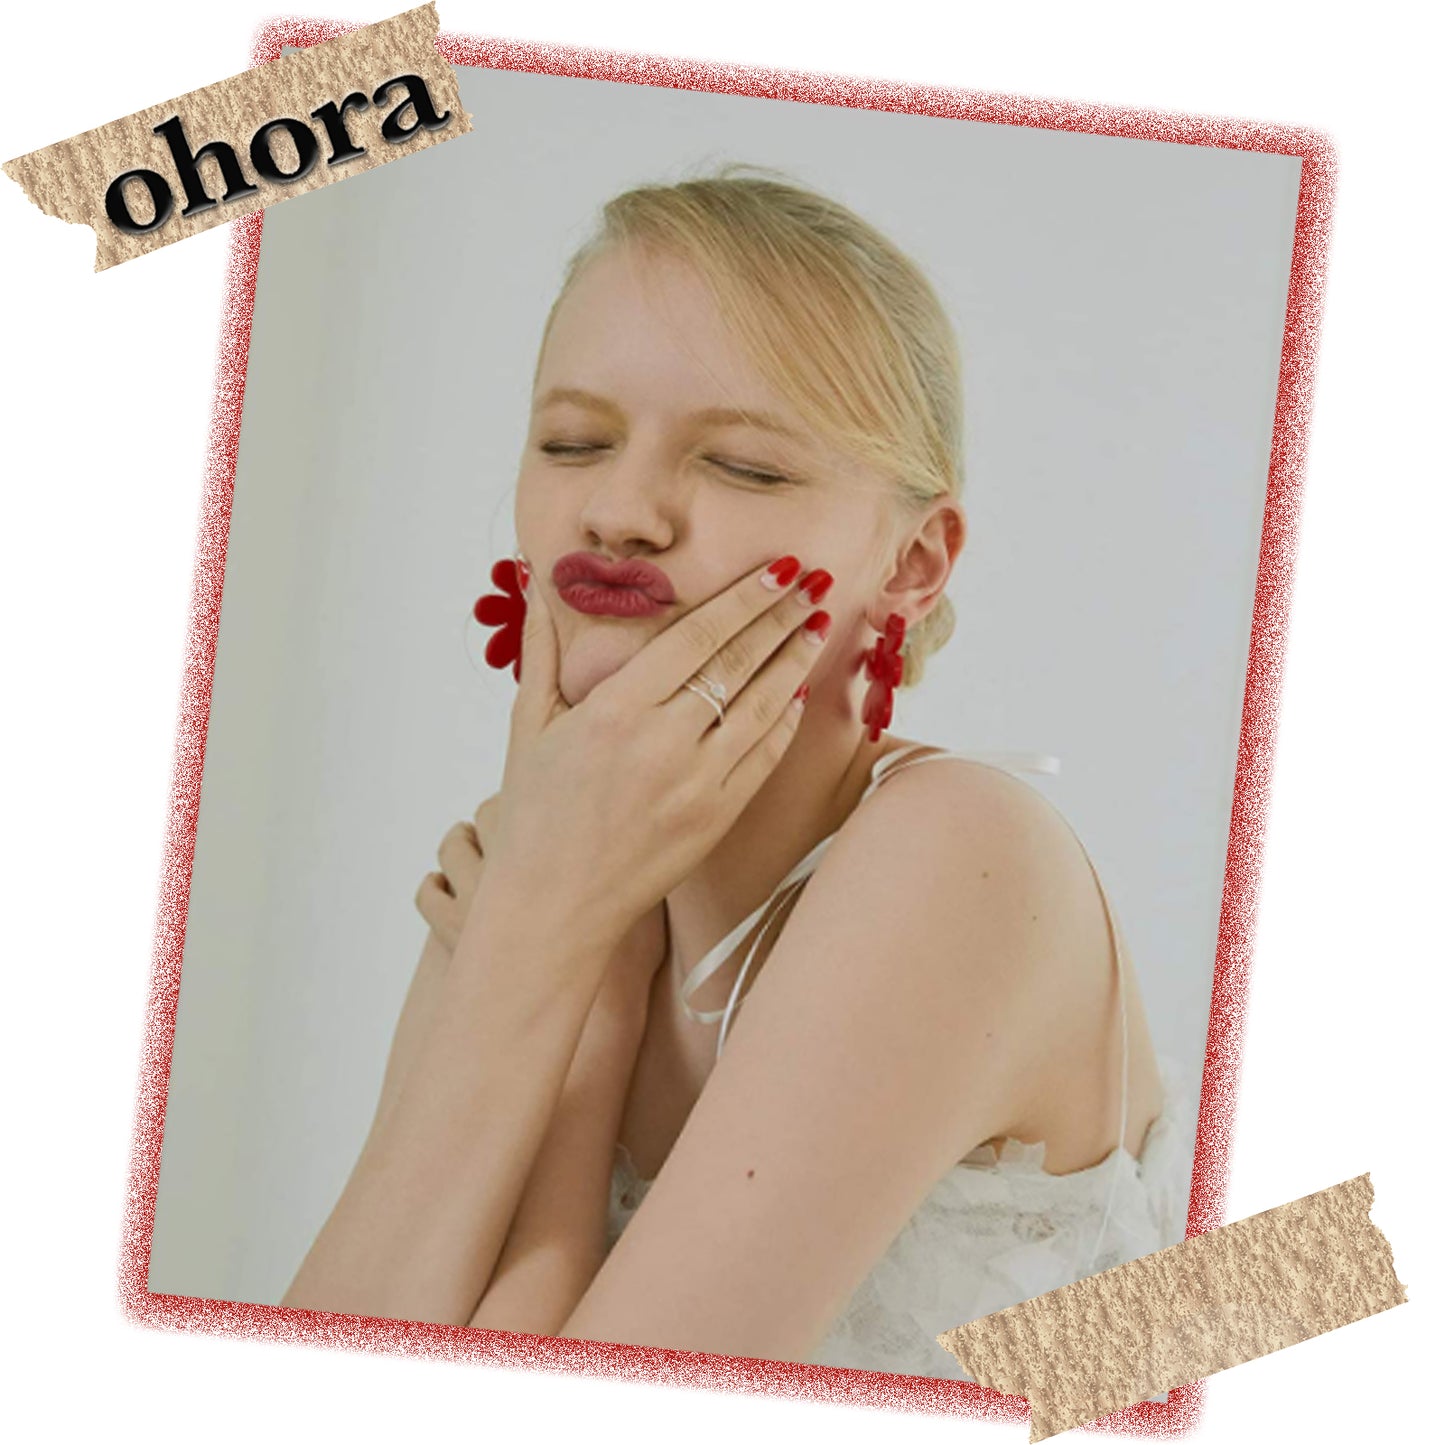 Ohora (N to You Nail)